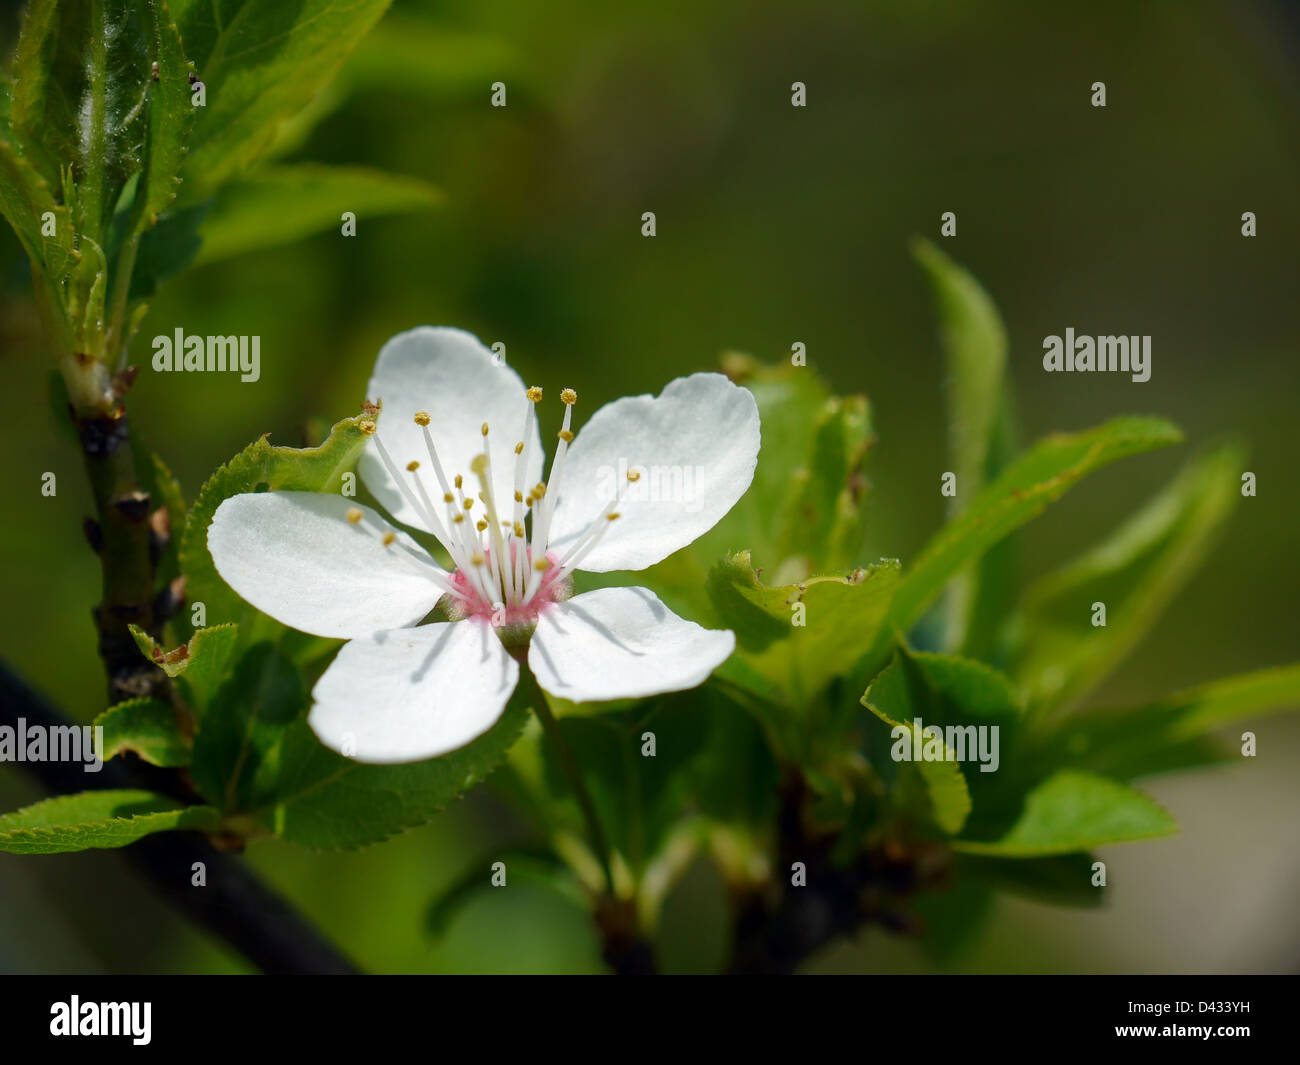 Closeup of blackthorn tree with blooming flower Stock Photo